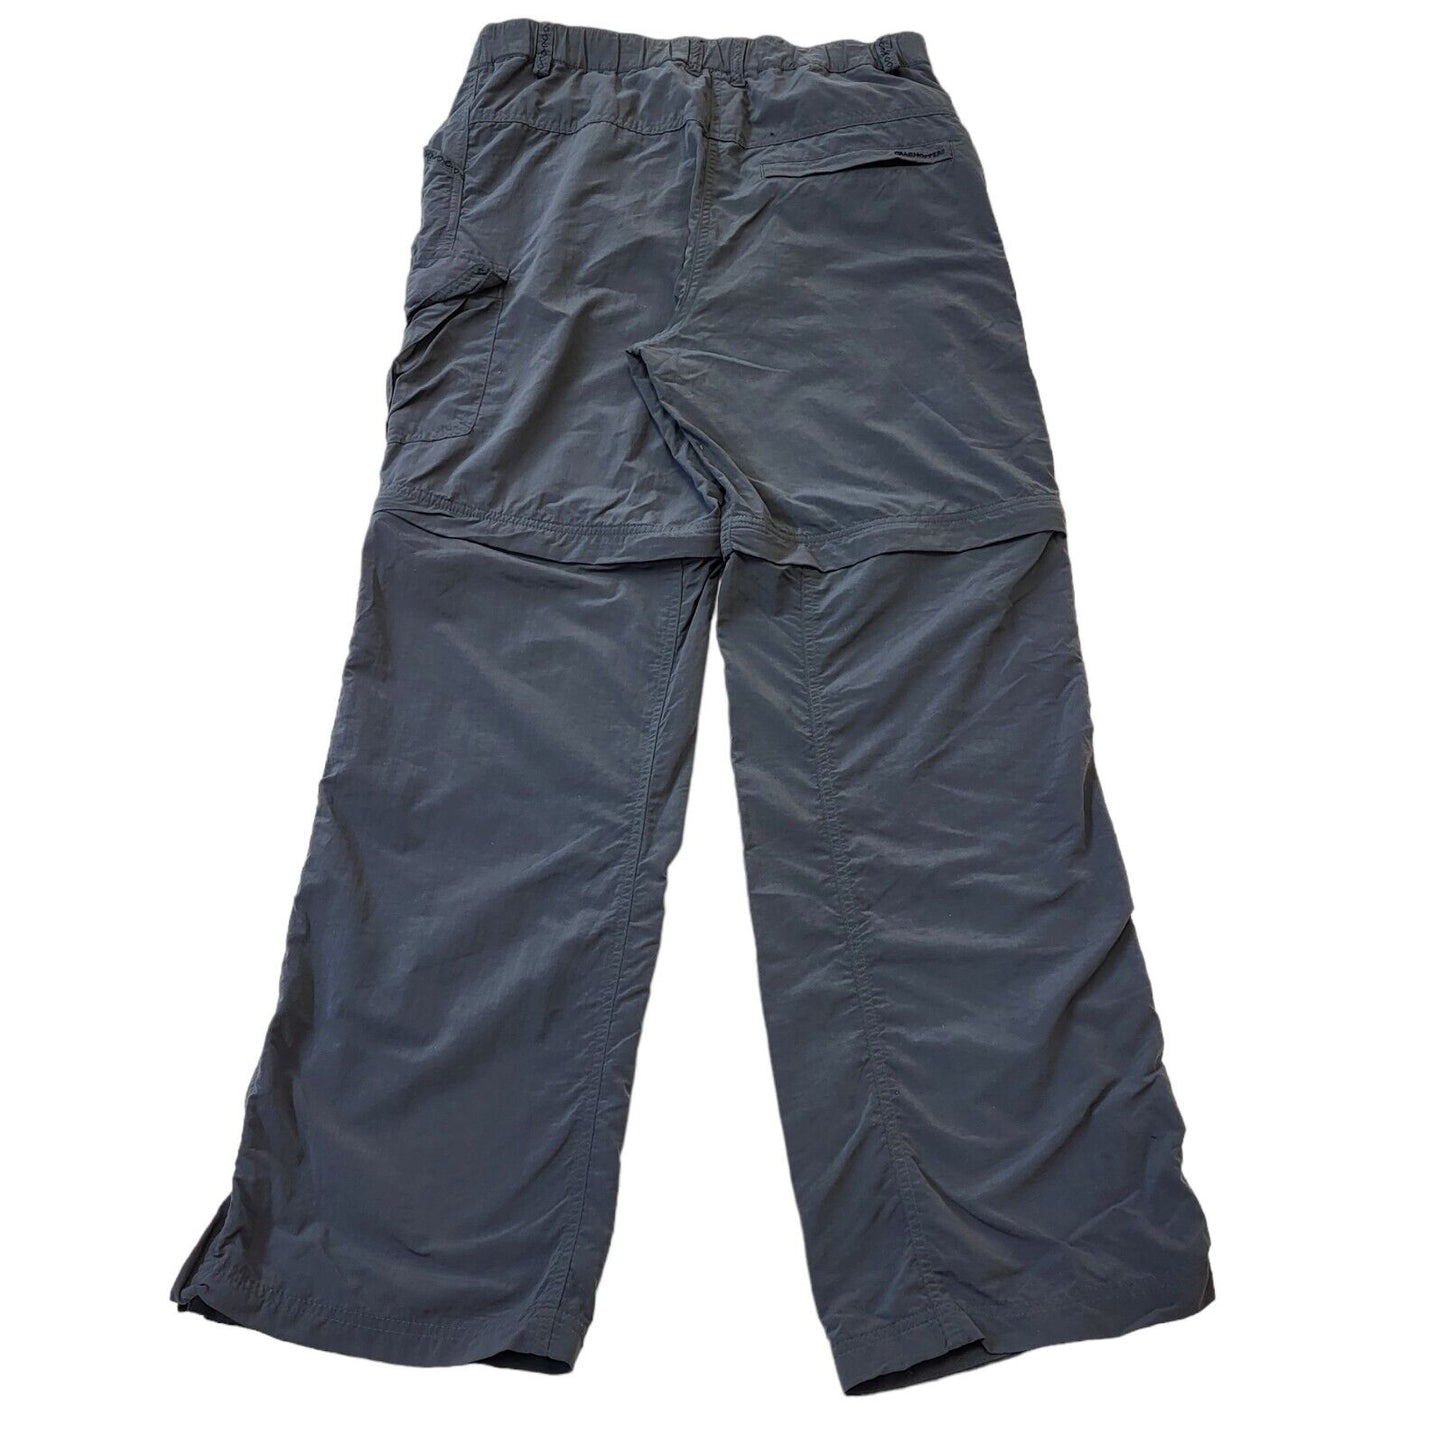 Graghoppers Trousers (12)